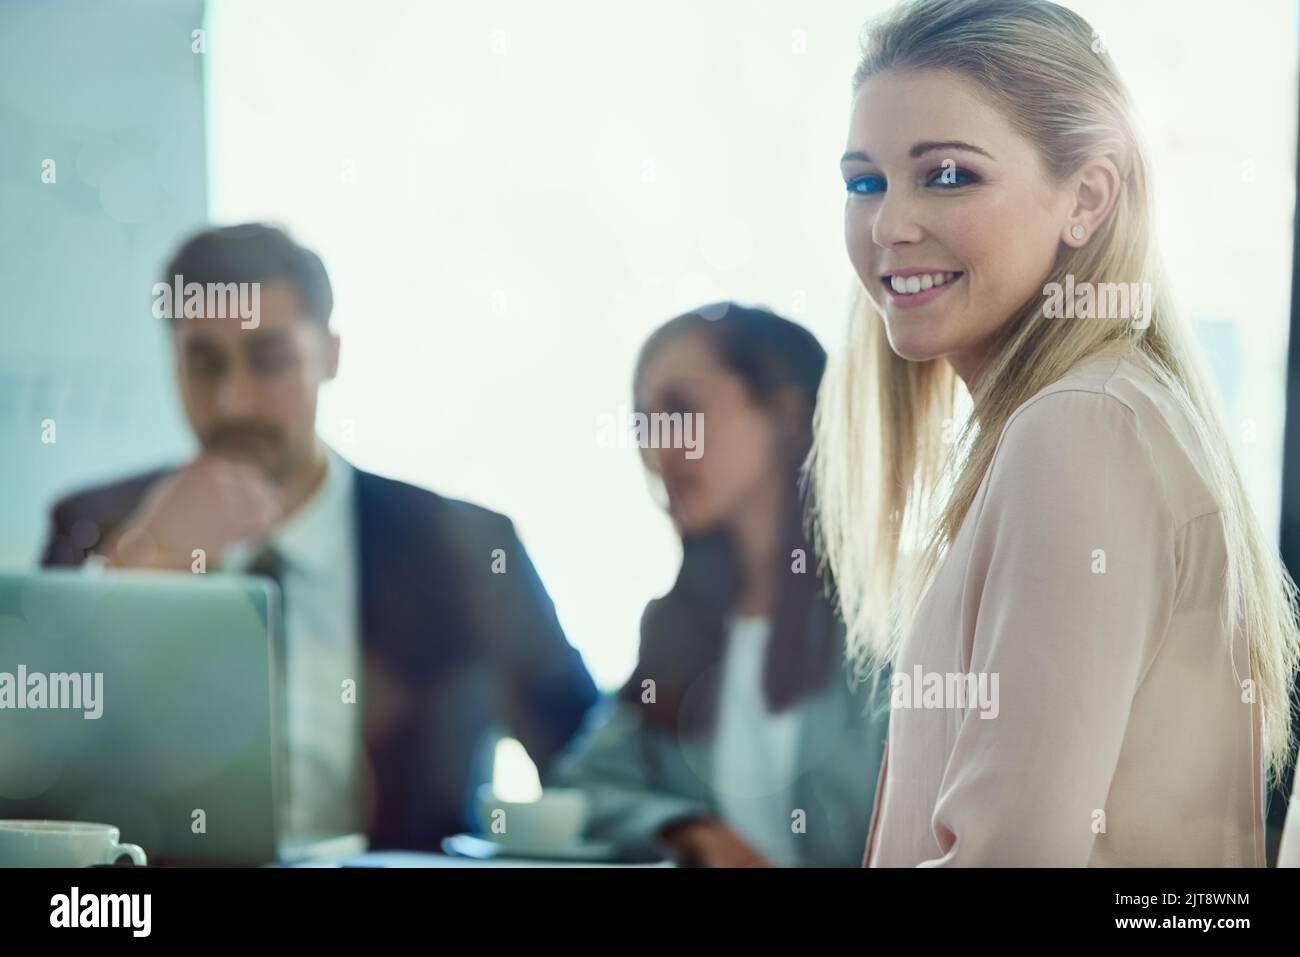 Making her way up the corporate ladder. Portrait of a smiling young executive sitting in a boardroom with coworkesr in the background. Stock Photo